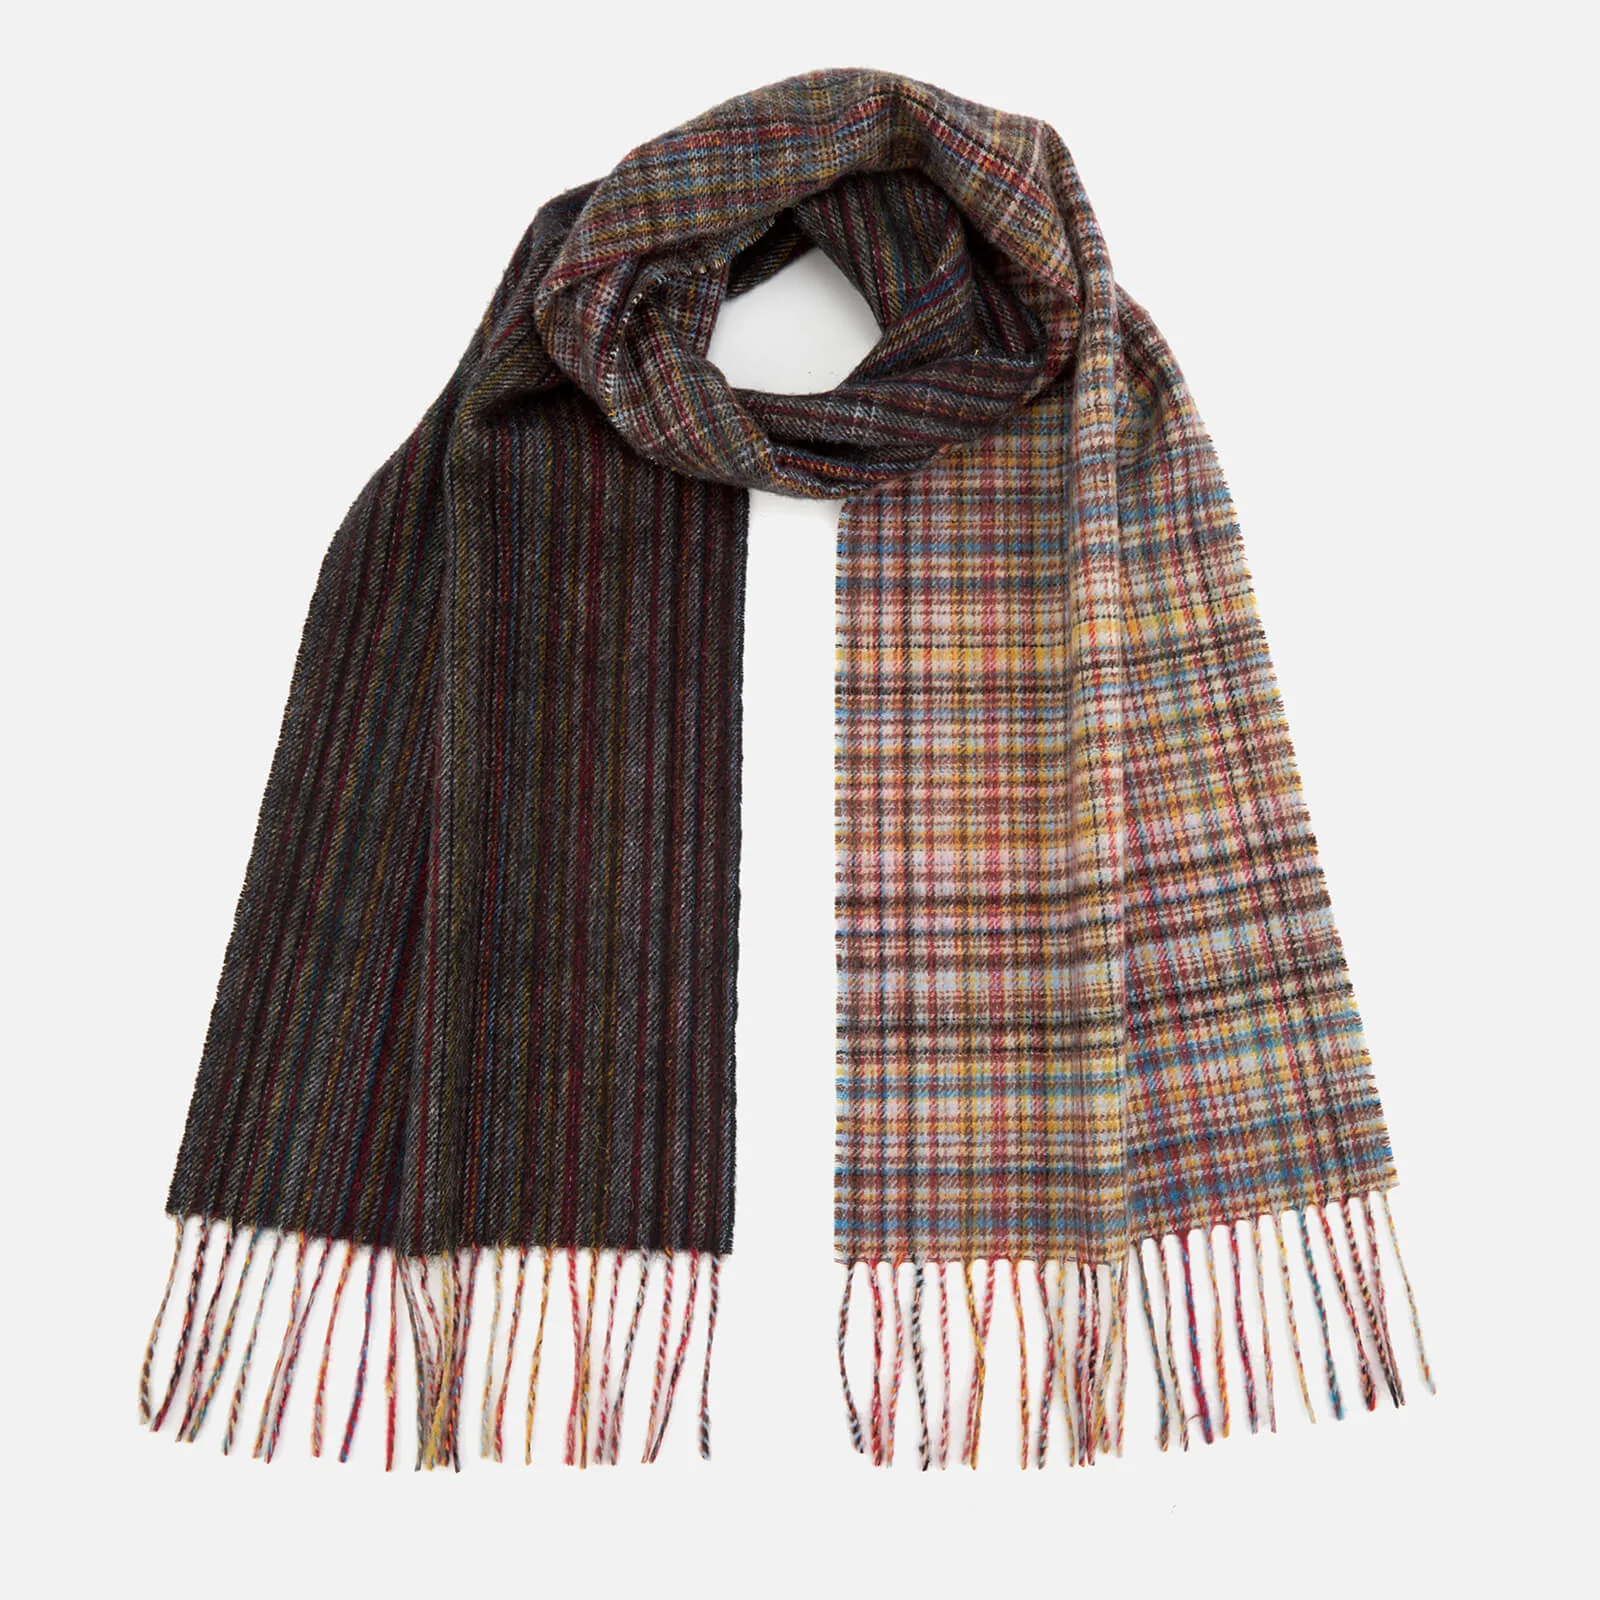 Paul Smith Men's Multistripe Check Wool Scarf - Red Image 1